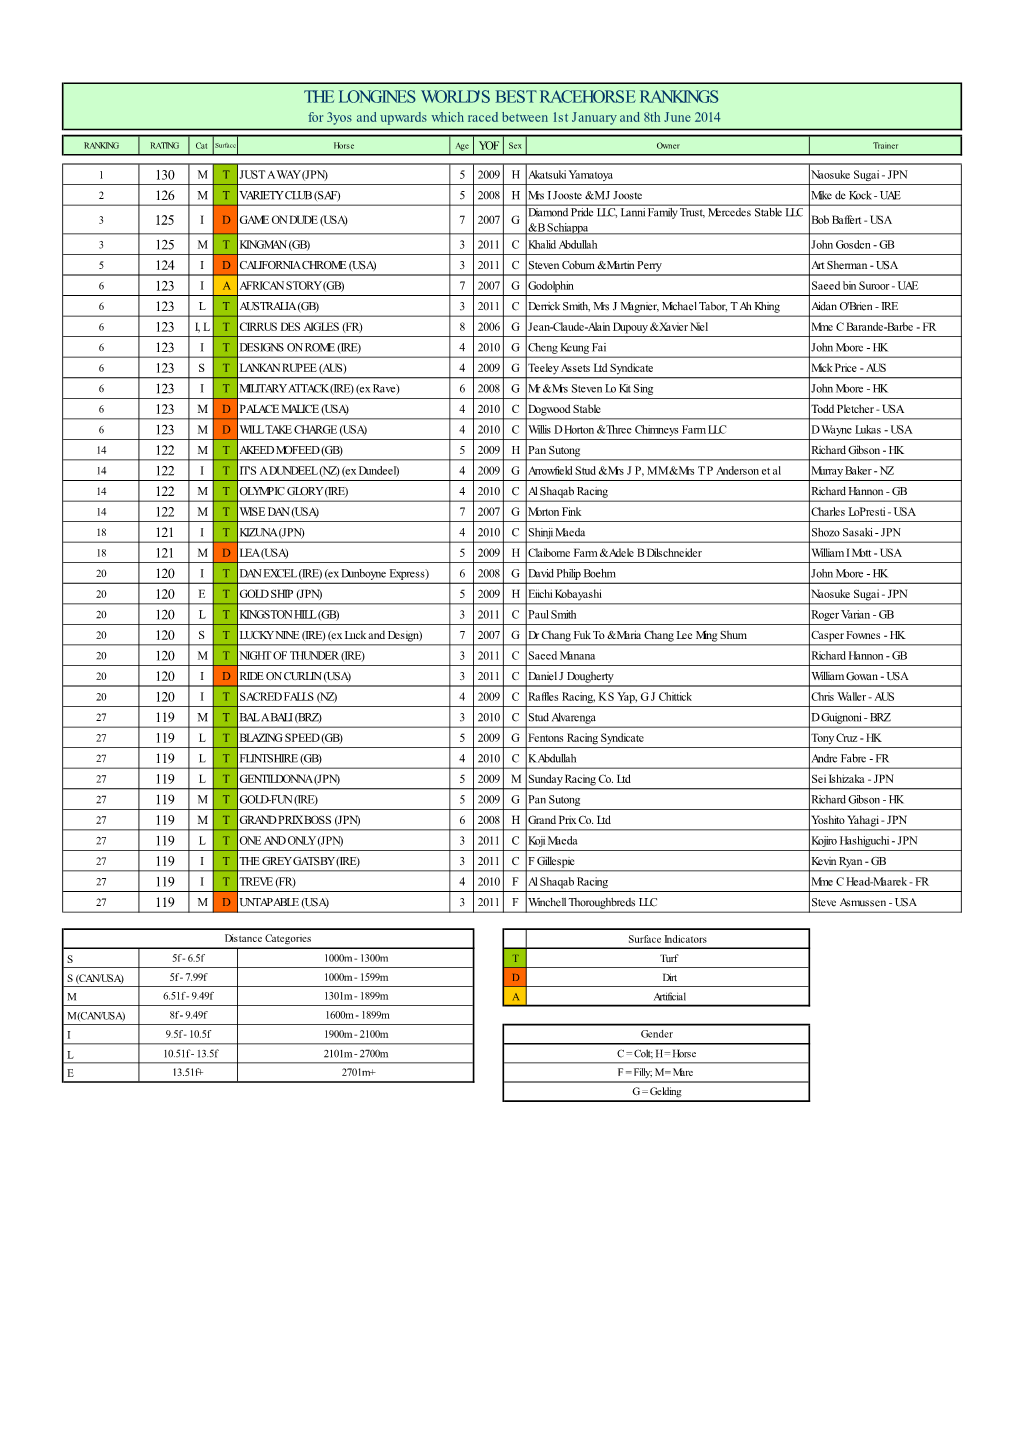 THE LONGINES WORLD's BEST RACEHORSE RANKINGS for 3Yos and Upwards Which Raced Between 1St January and 8Th June 2014